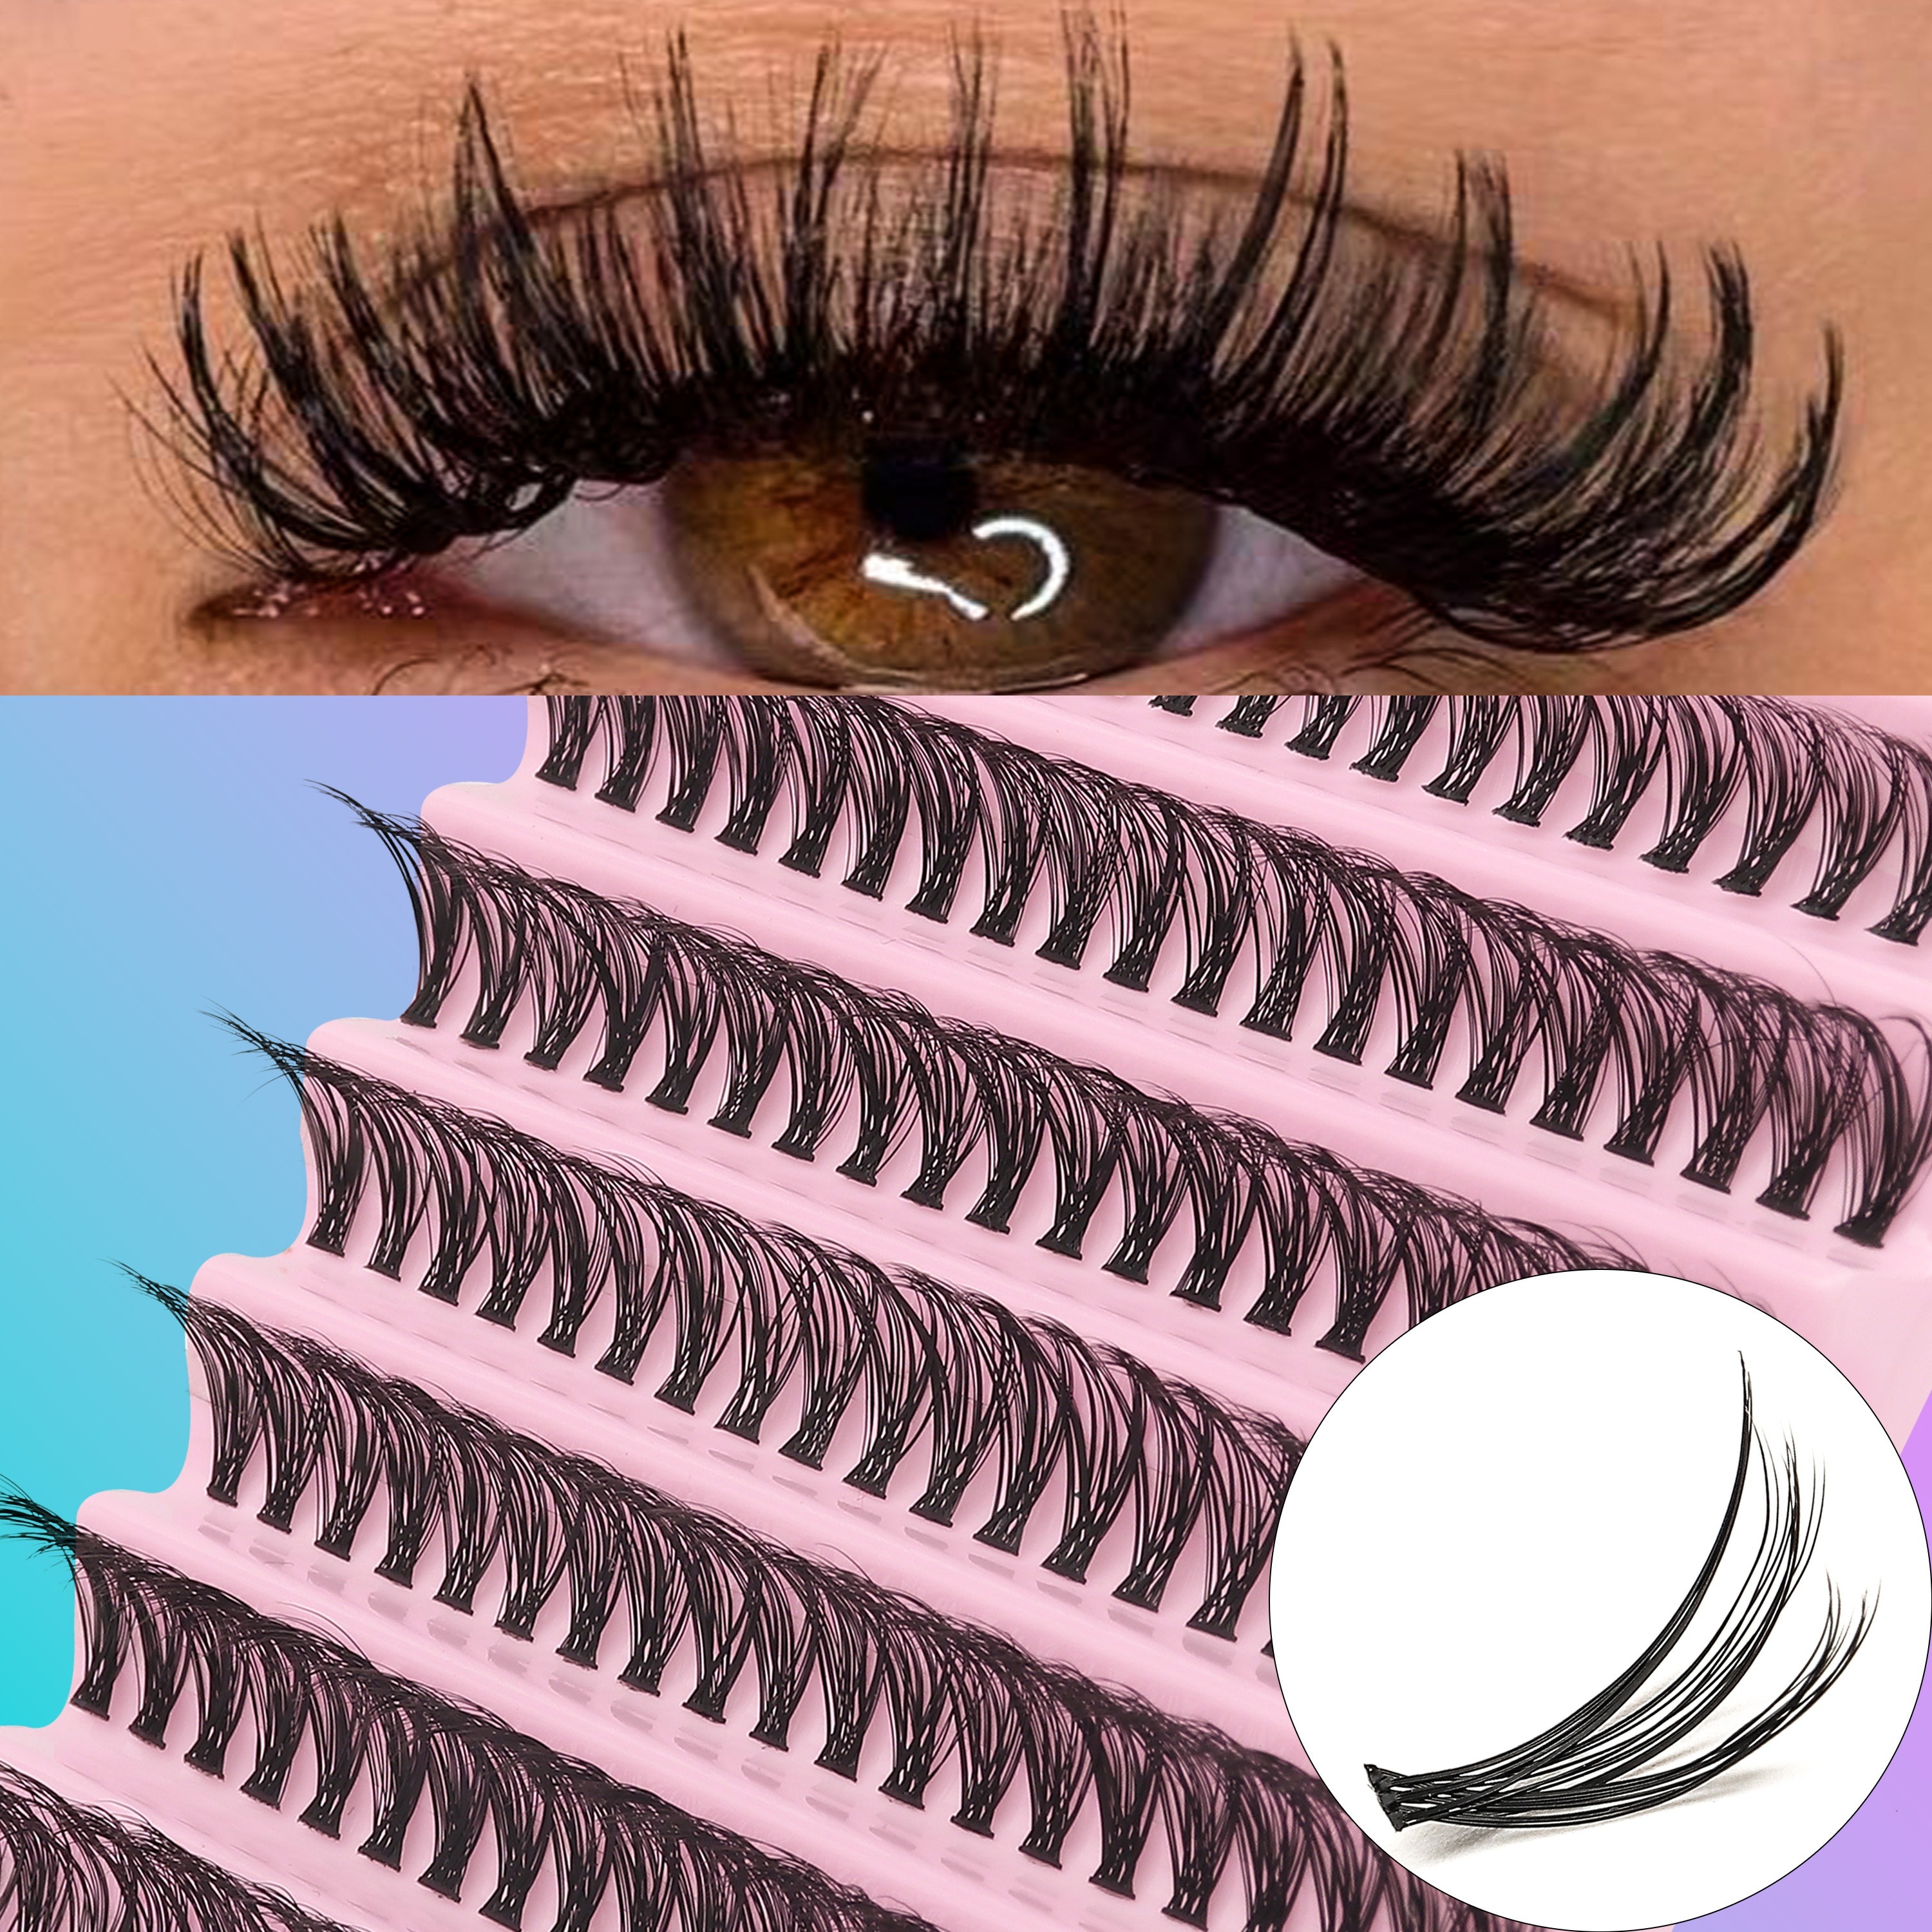 

200 Clusters Of Gathered Segmented Extension 30d Mixed Gathered Eyelashes 0.07mm Thick D 8mm-16mm Mixed Natural Style Russian Stripes Thick And Fluffy Eyelashes Handmade Mink Eyelashes Gathered